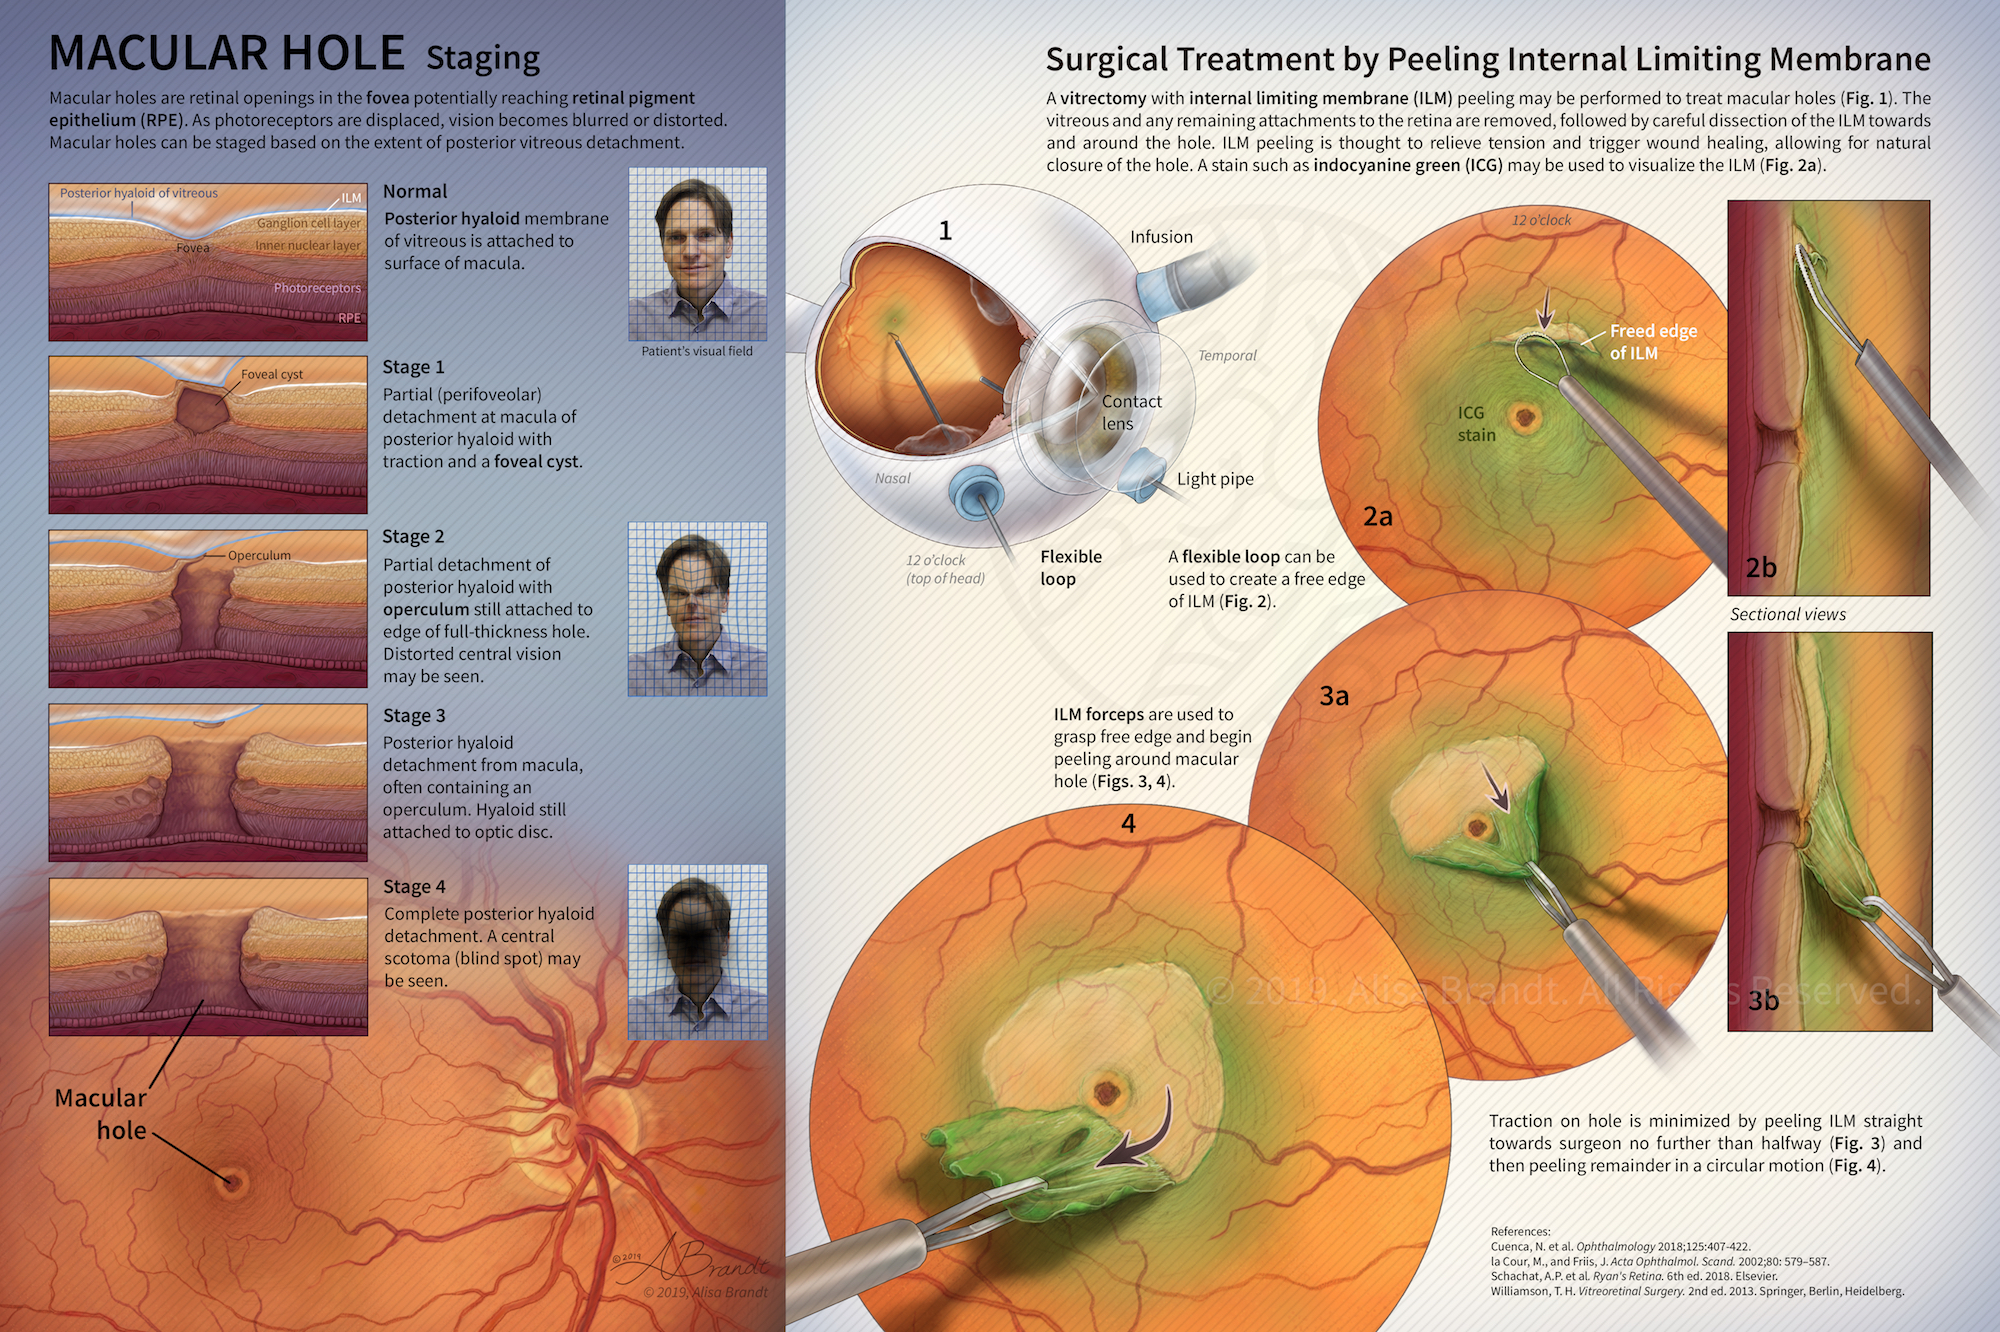 Macular hole staging and surgical treatment illustration © 2019 Alisa Brandt